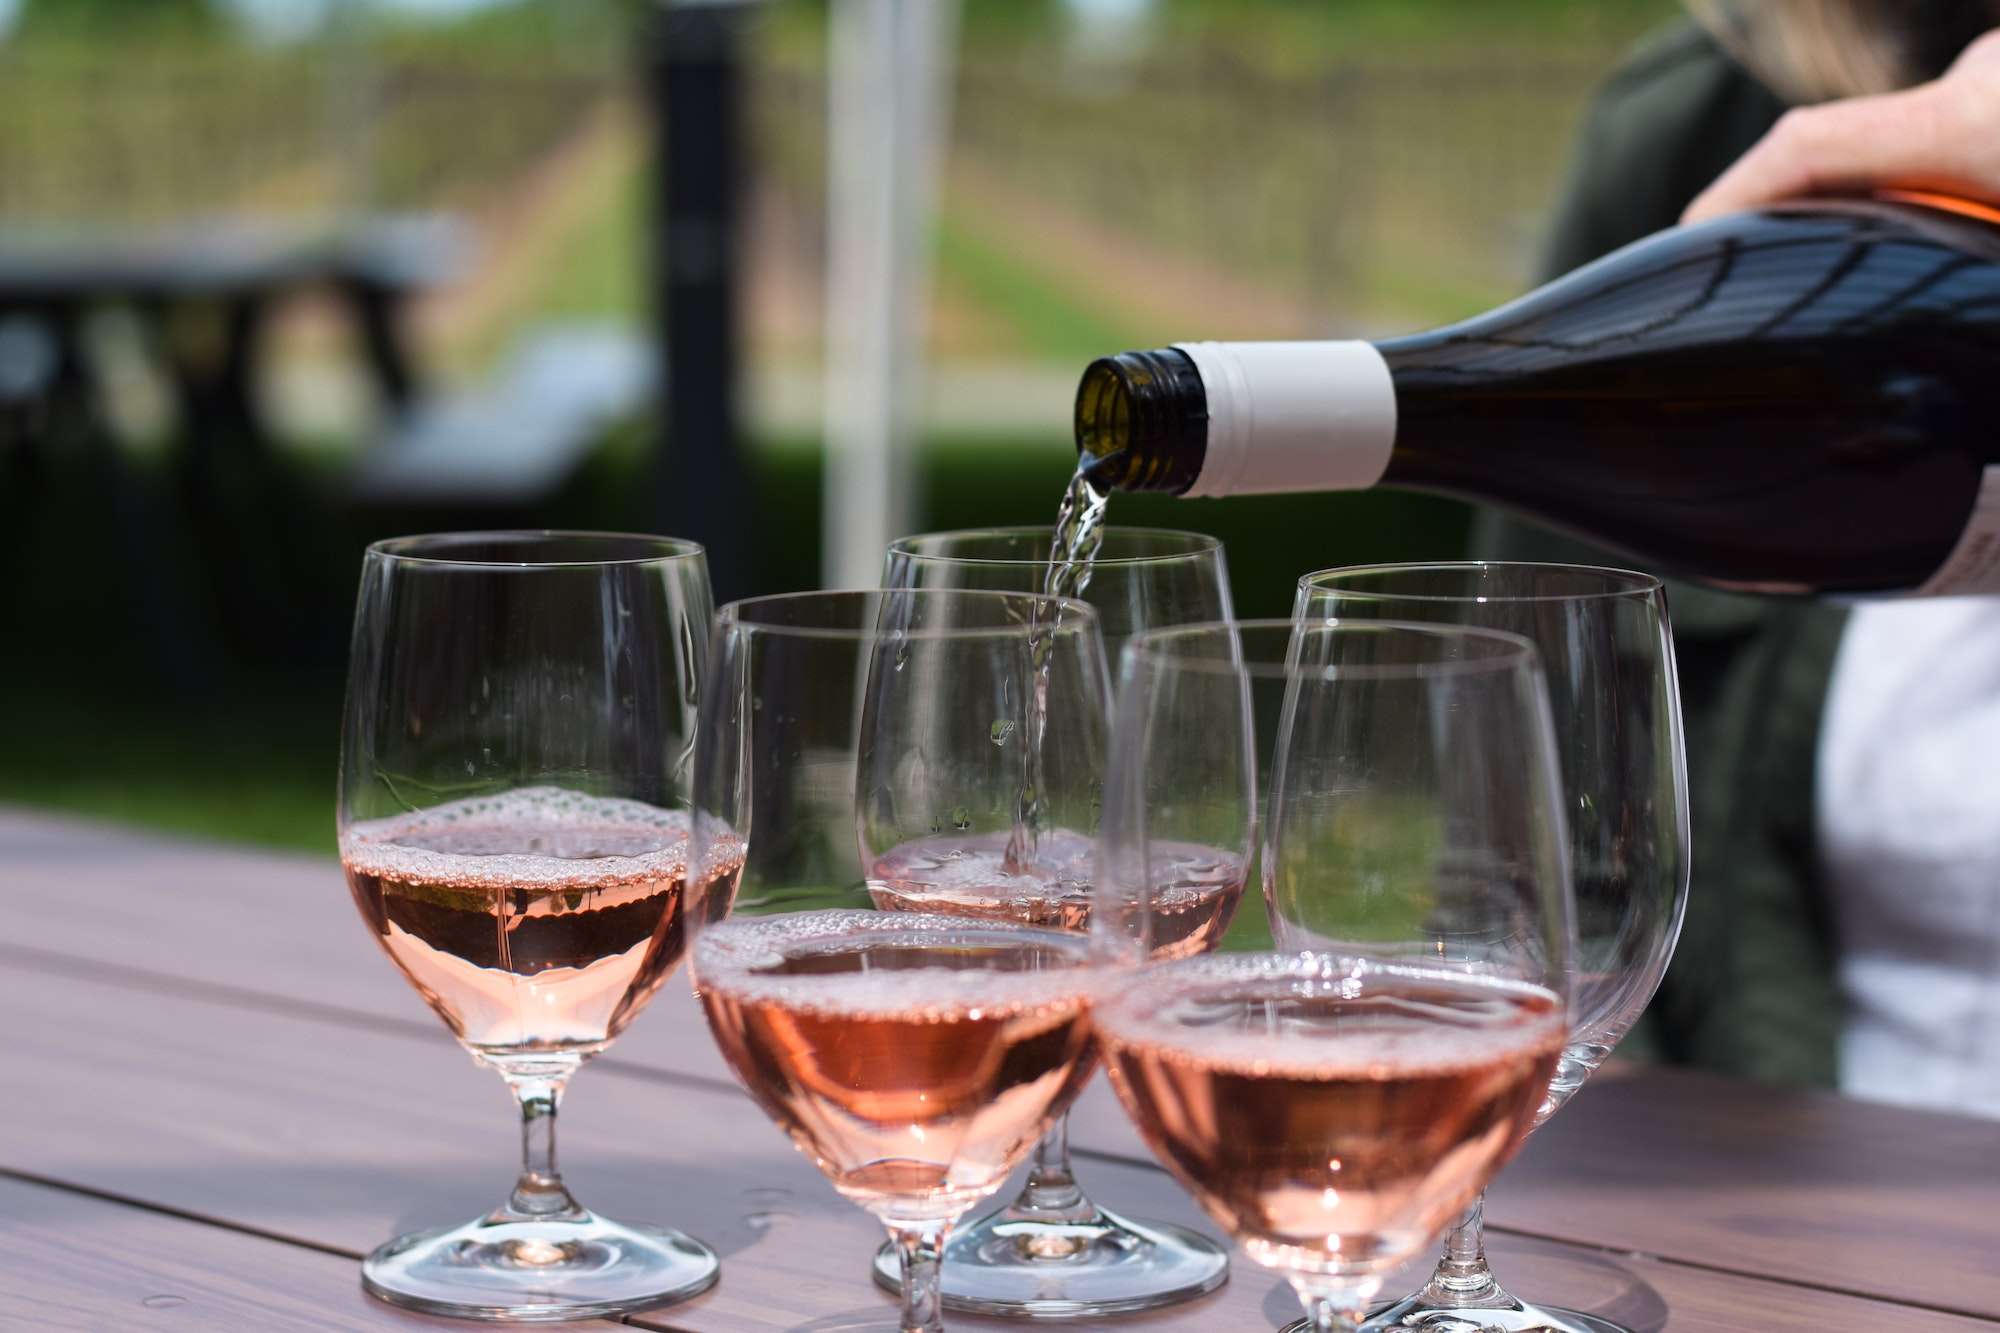 Persons hand pouring rose wine into multiple glasses